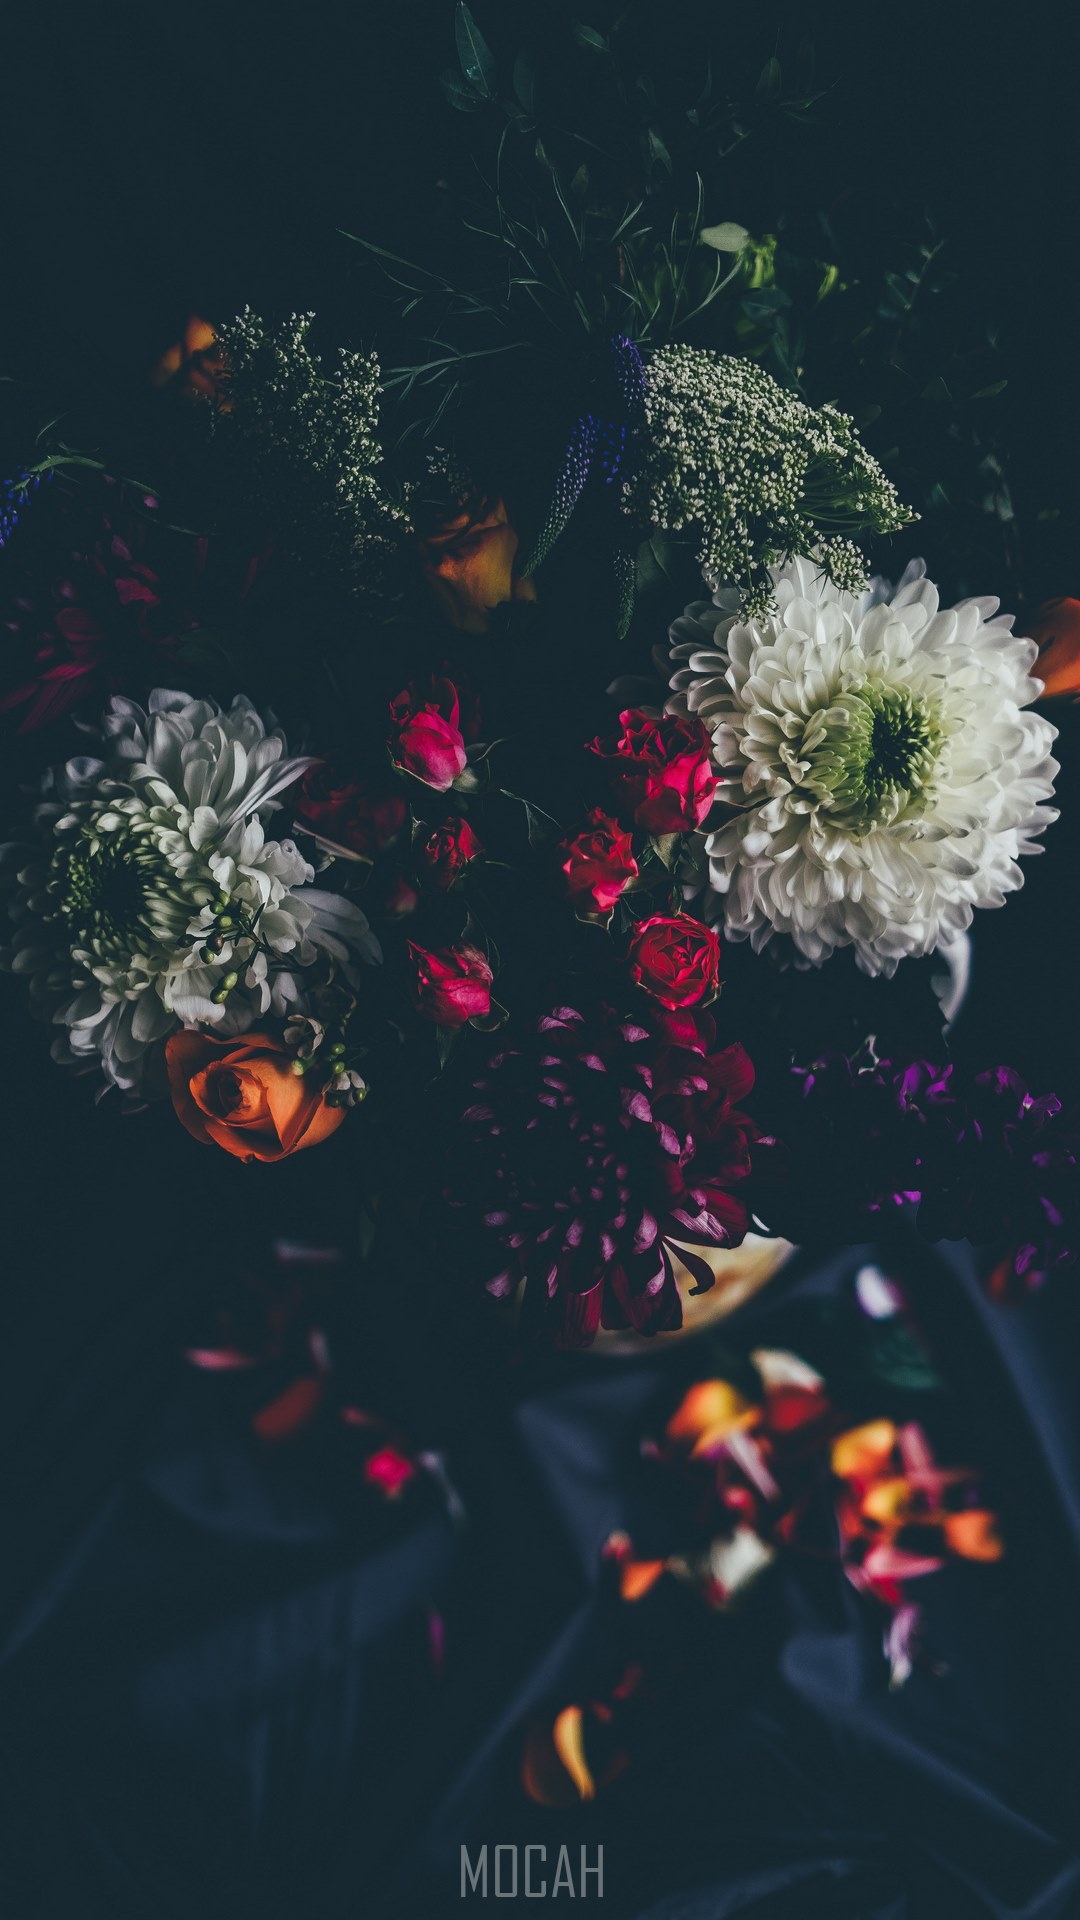 a dim shot of dahlias and roses among other flowers in a colorful bouquet, , Xiaomi Redmi Note 5A wallpaper free download, 720x1280 Gallery HD Wallpaper